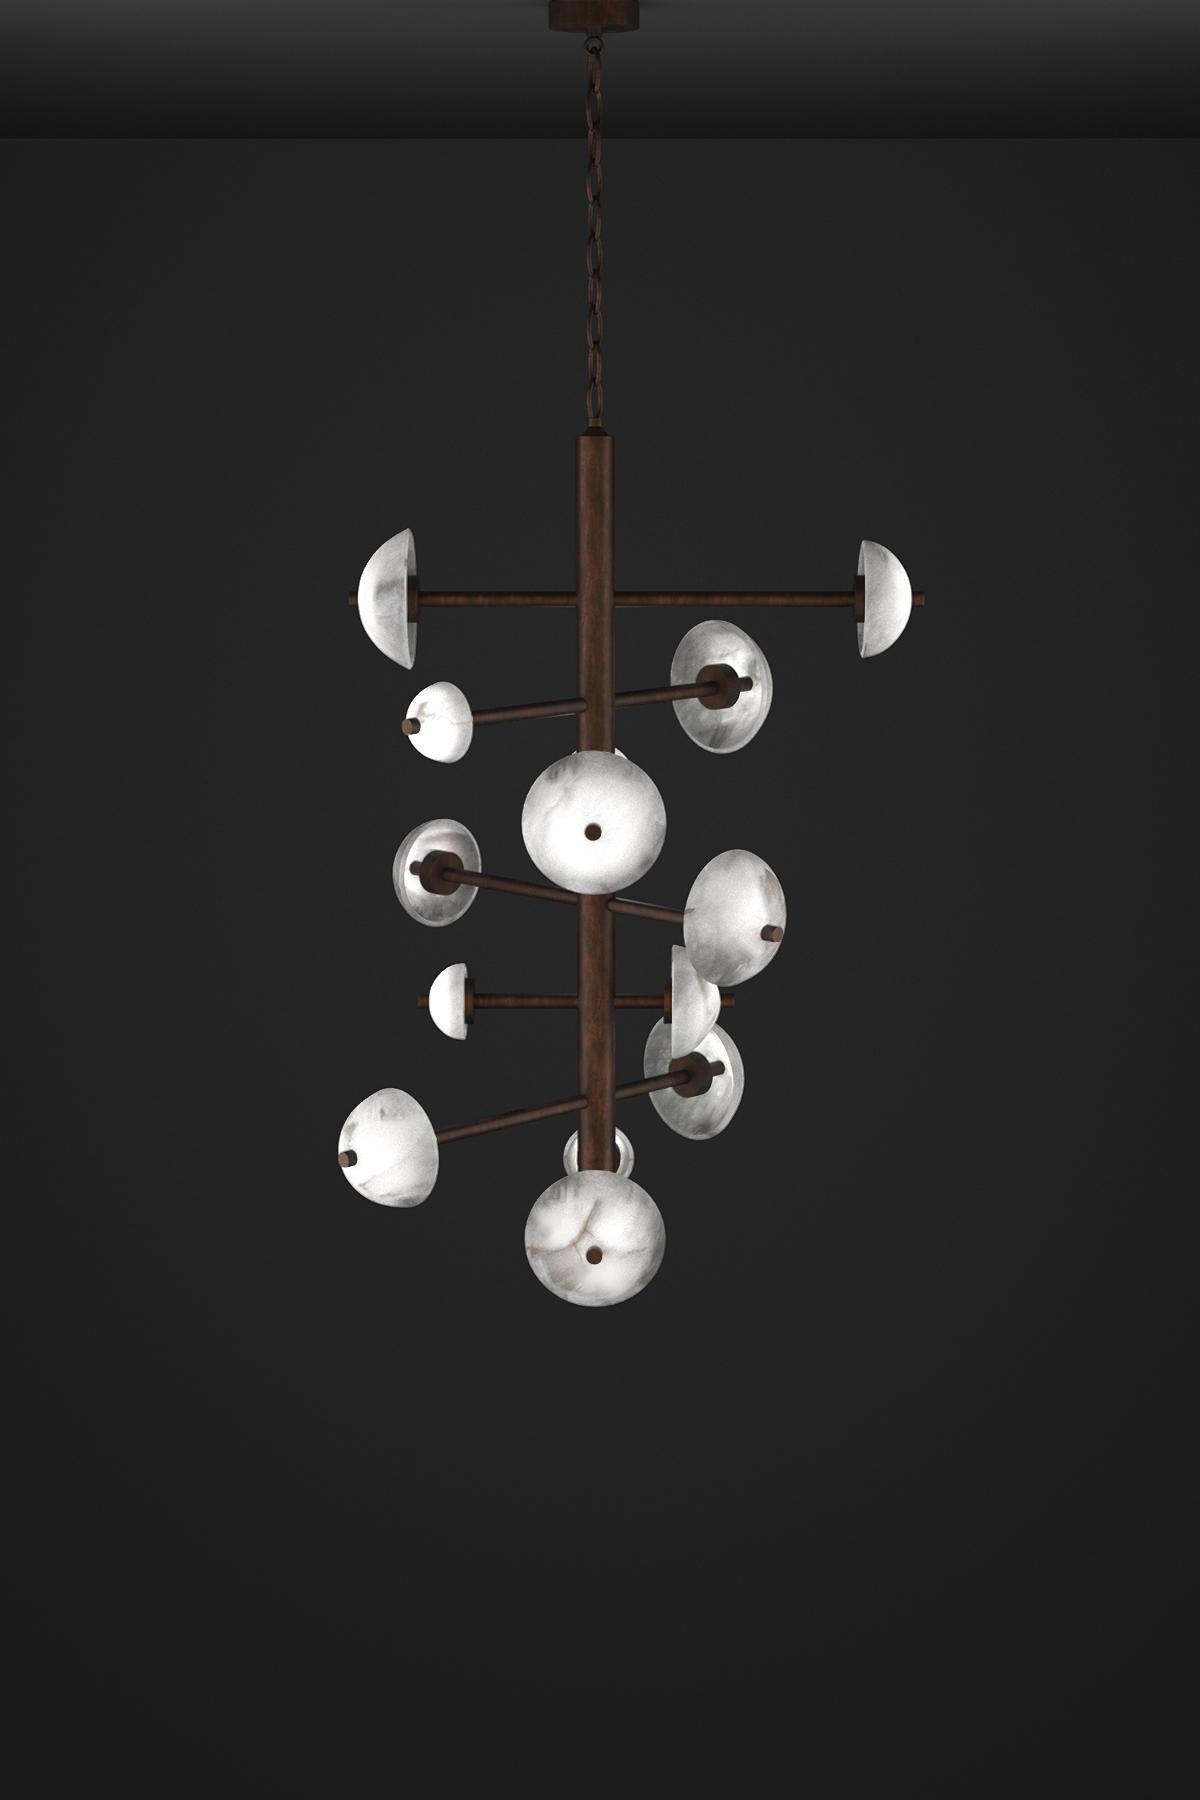 Apollo Ruggine Of Florence Metal Chandelier by Alabastro Italiano
Dimensions: D 70,5 x W 55 x H 111 cm.
Materials: White alabaster and metal.

Available in different finishes: Shiny Silver, Bronze, Brushed Brass, Ruggine of Florence, Brushed